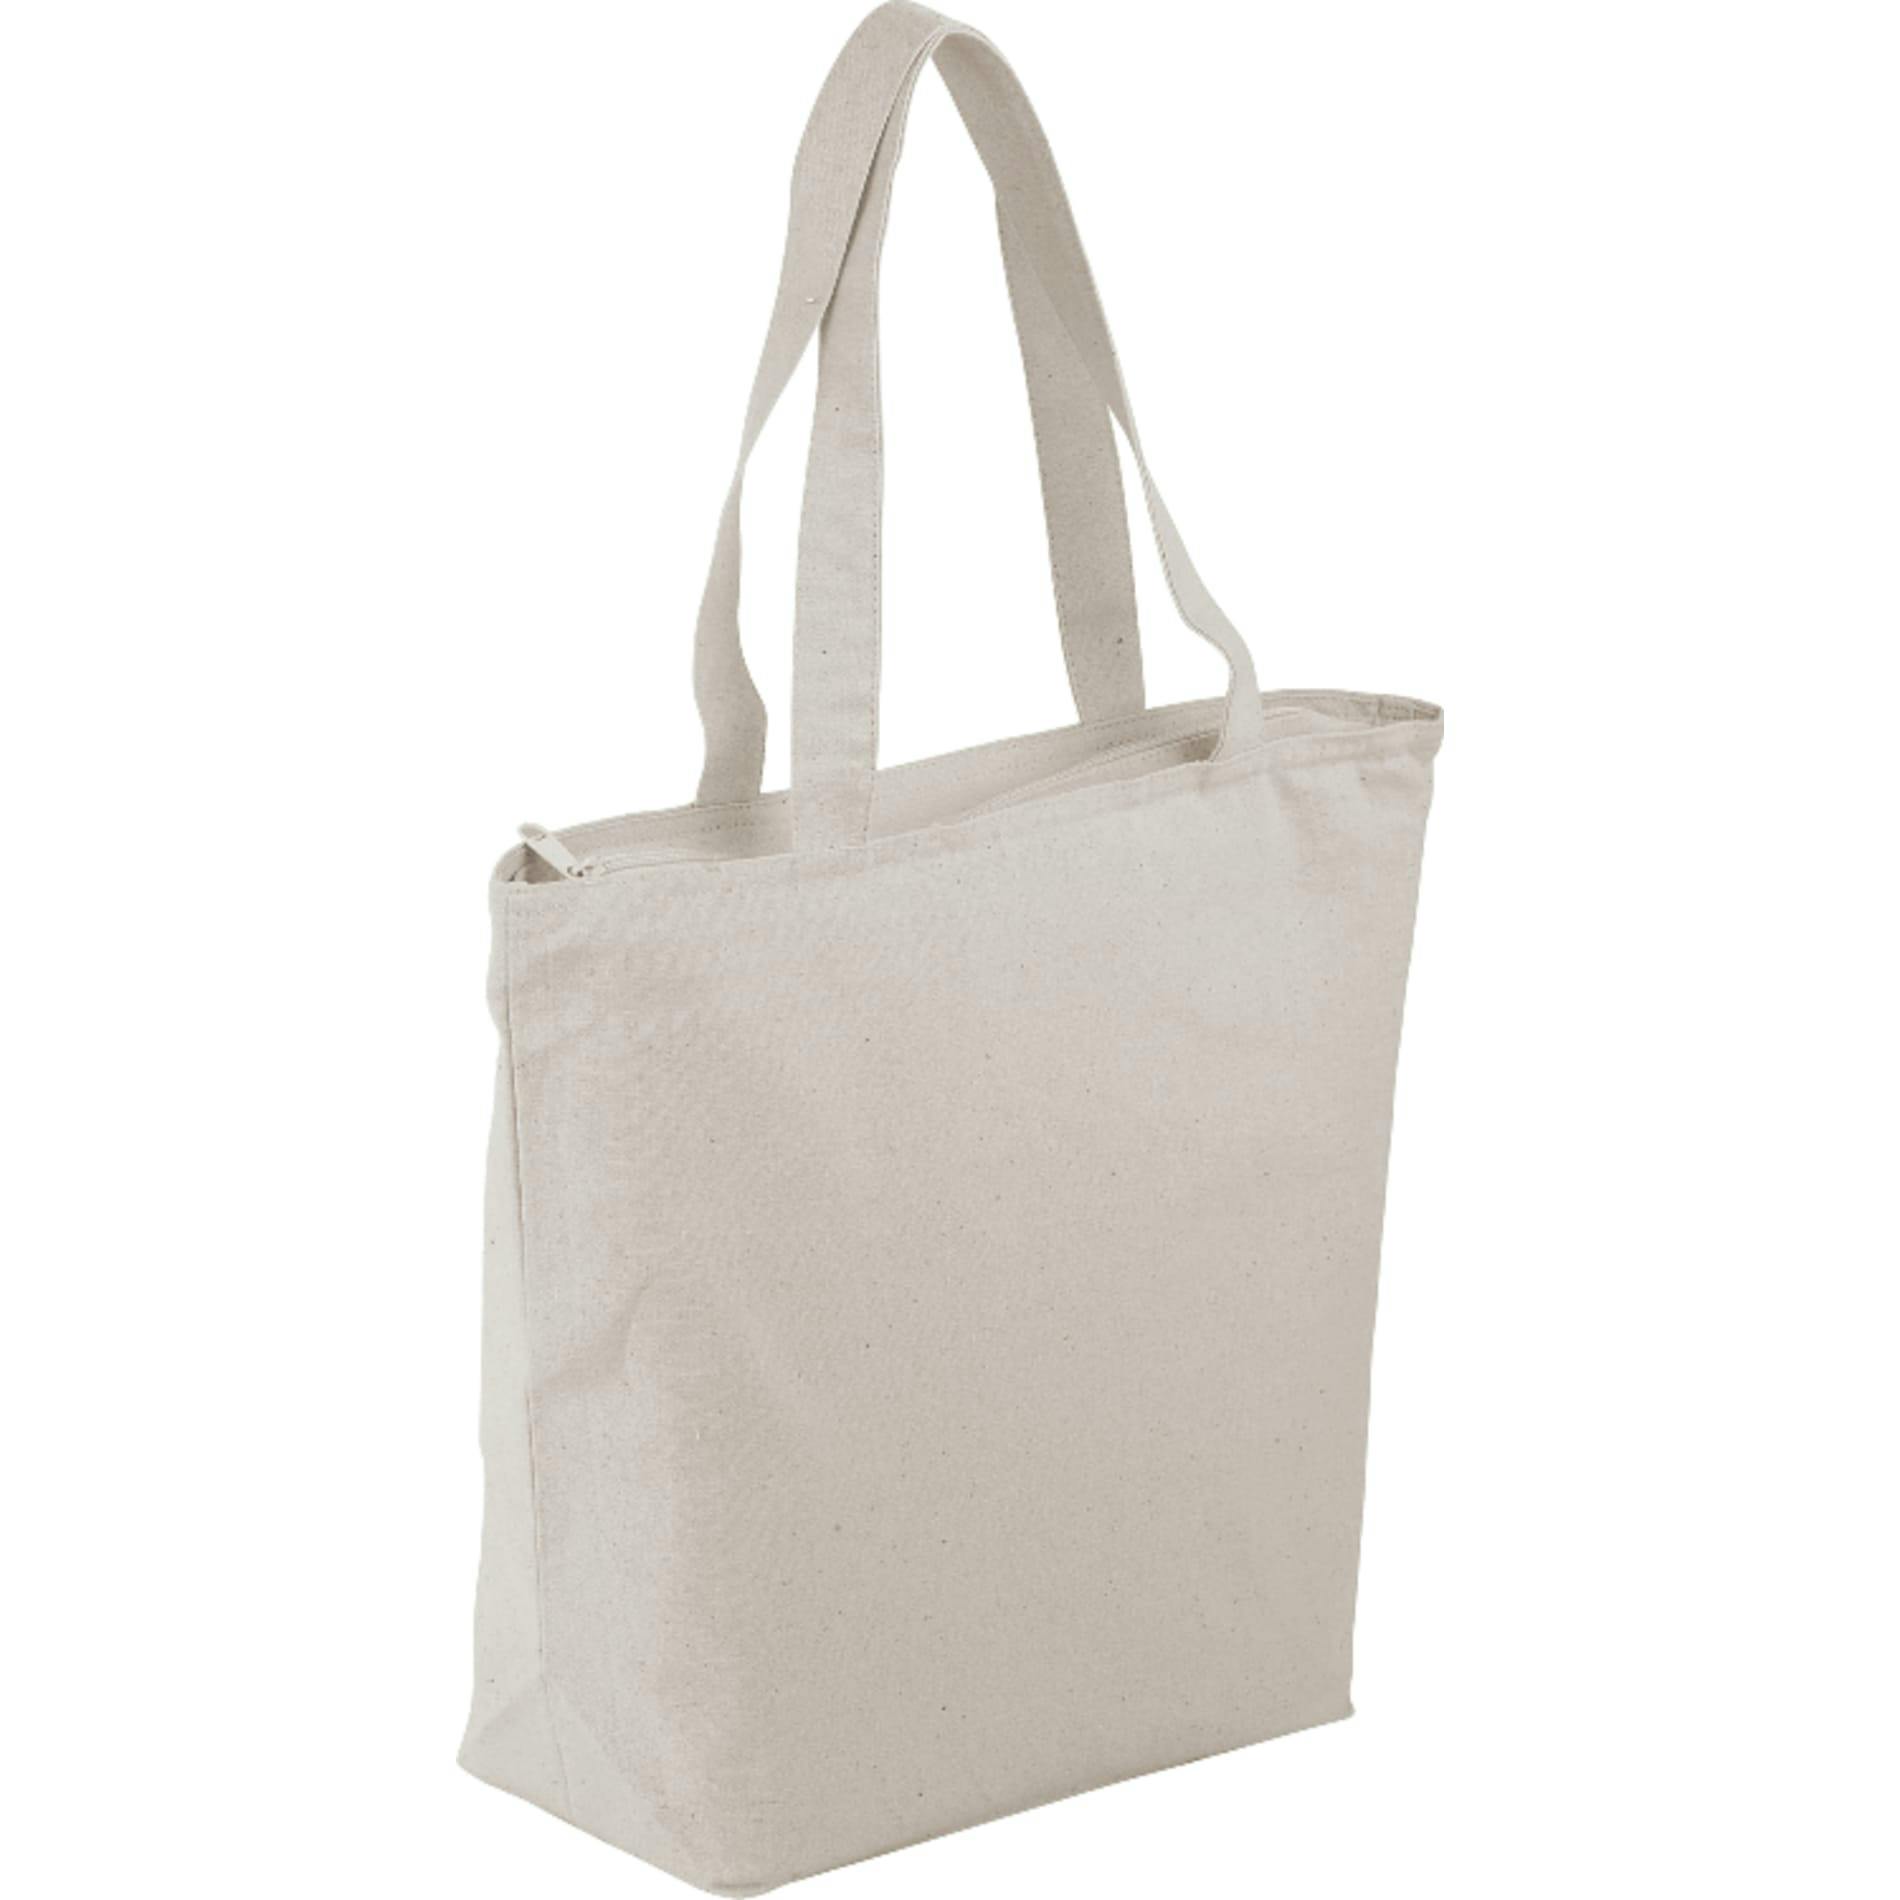 Maine 8oz Cotton Canvas Zippered Tote - additional Image 2